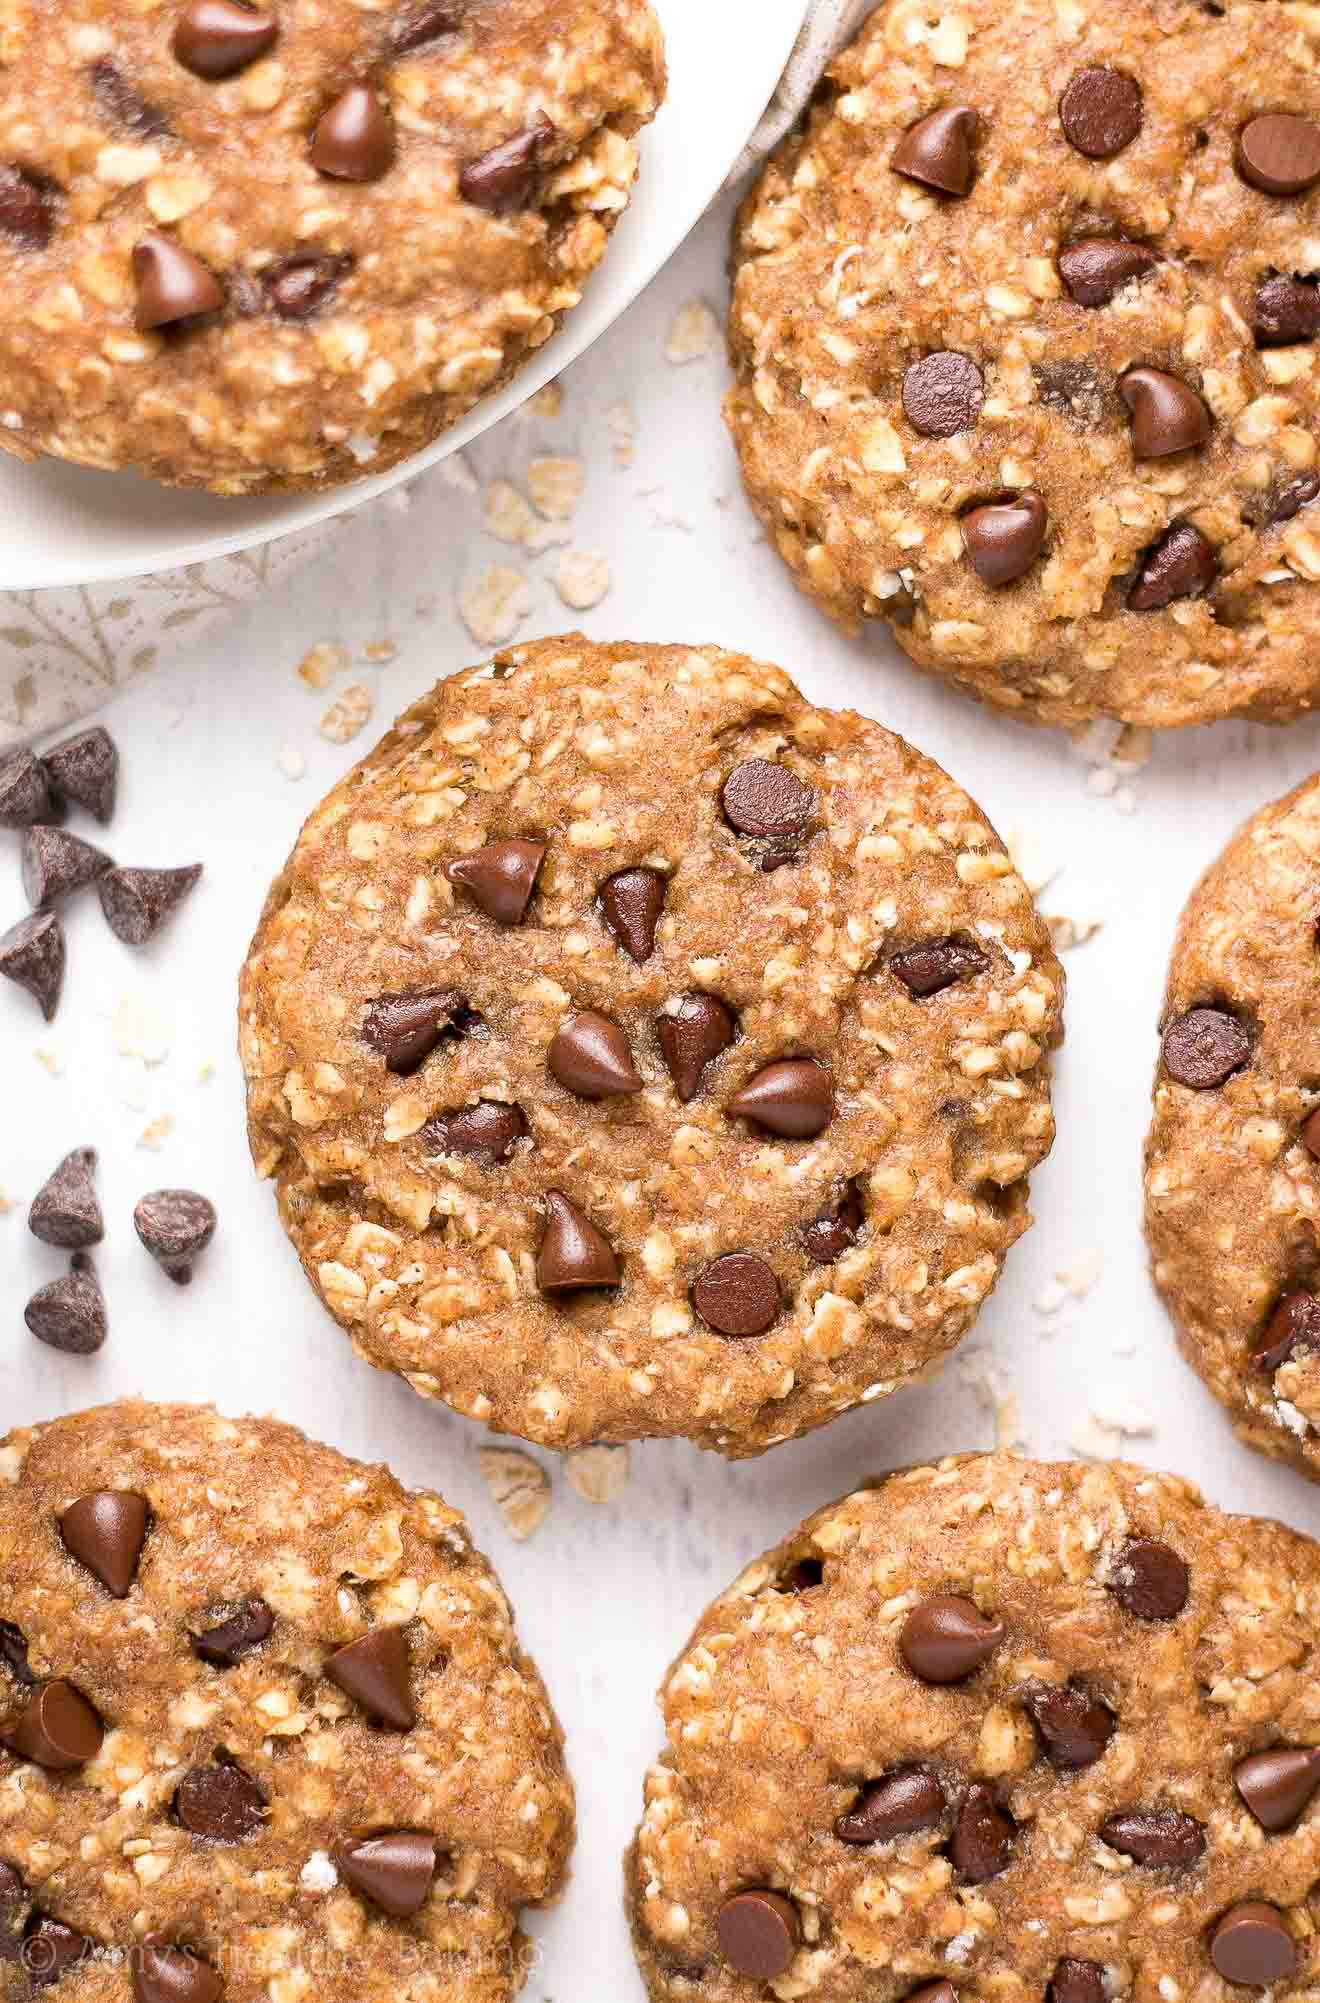 Healthy Oatmeal Peanut Butter Chocolate Chip Cookies
 healthy oatmeal peanut butter chocolate chip cookies recipe